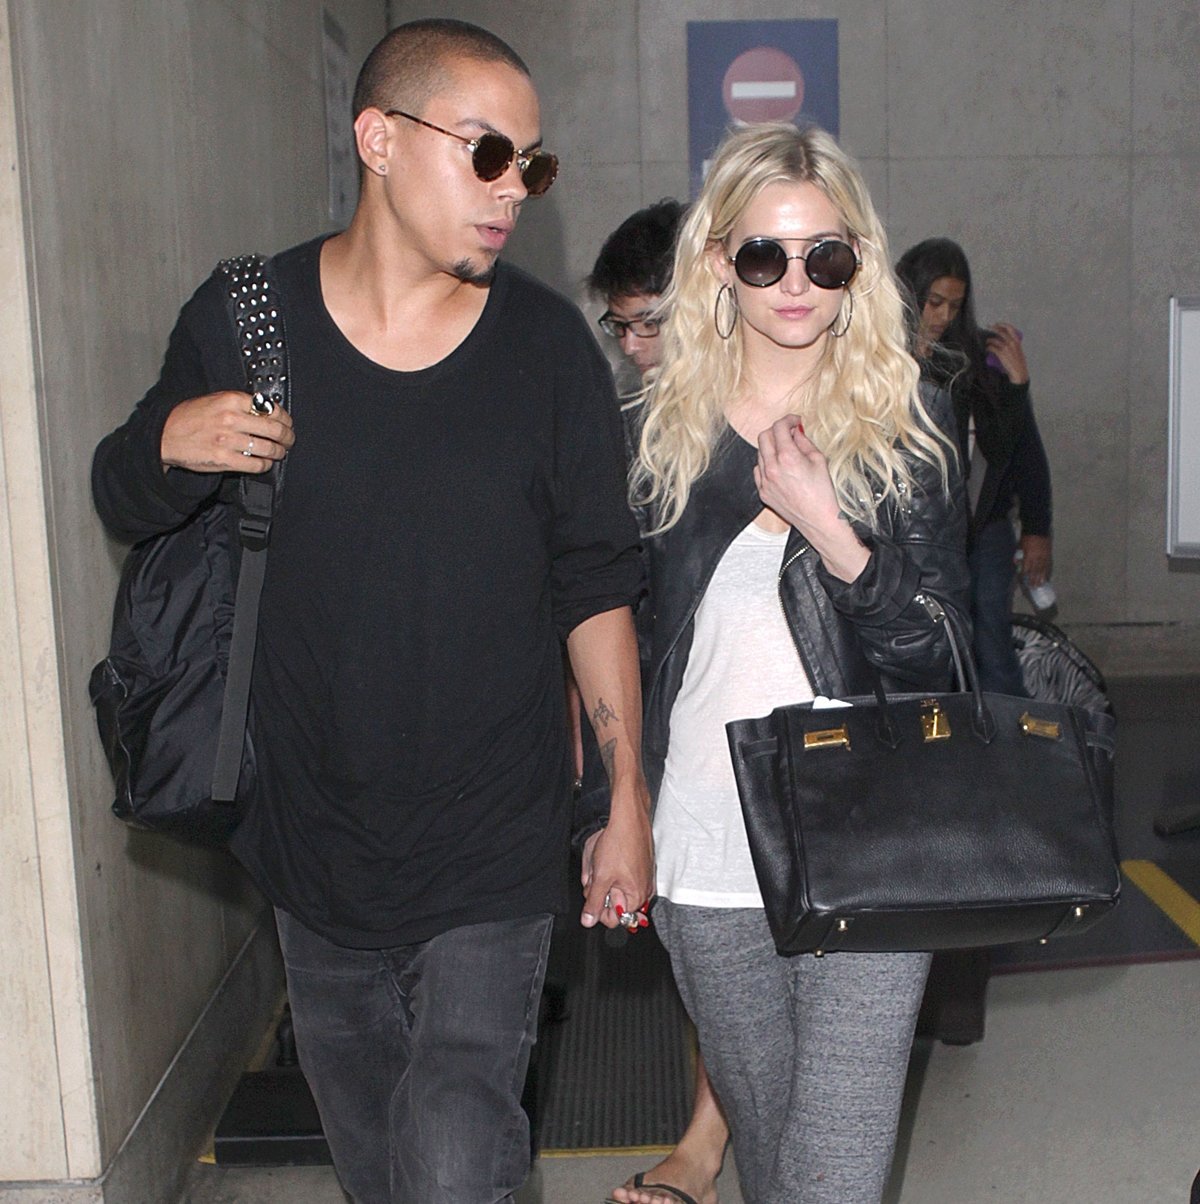 Ashlee Simpson and Evan Ross married in 2014 after less than a year of dating